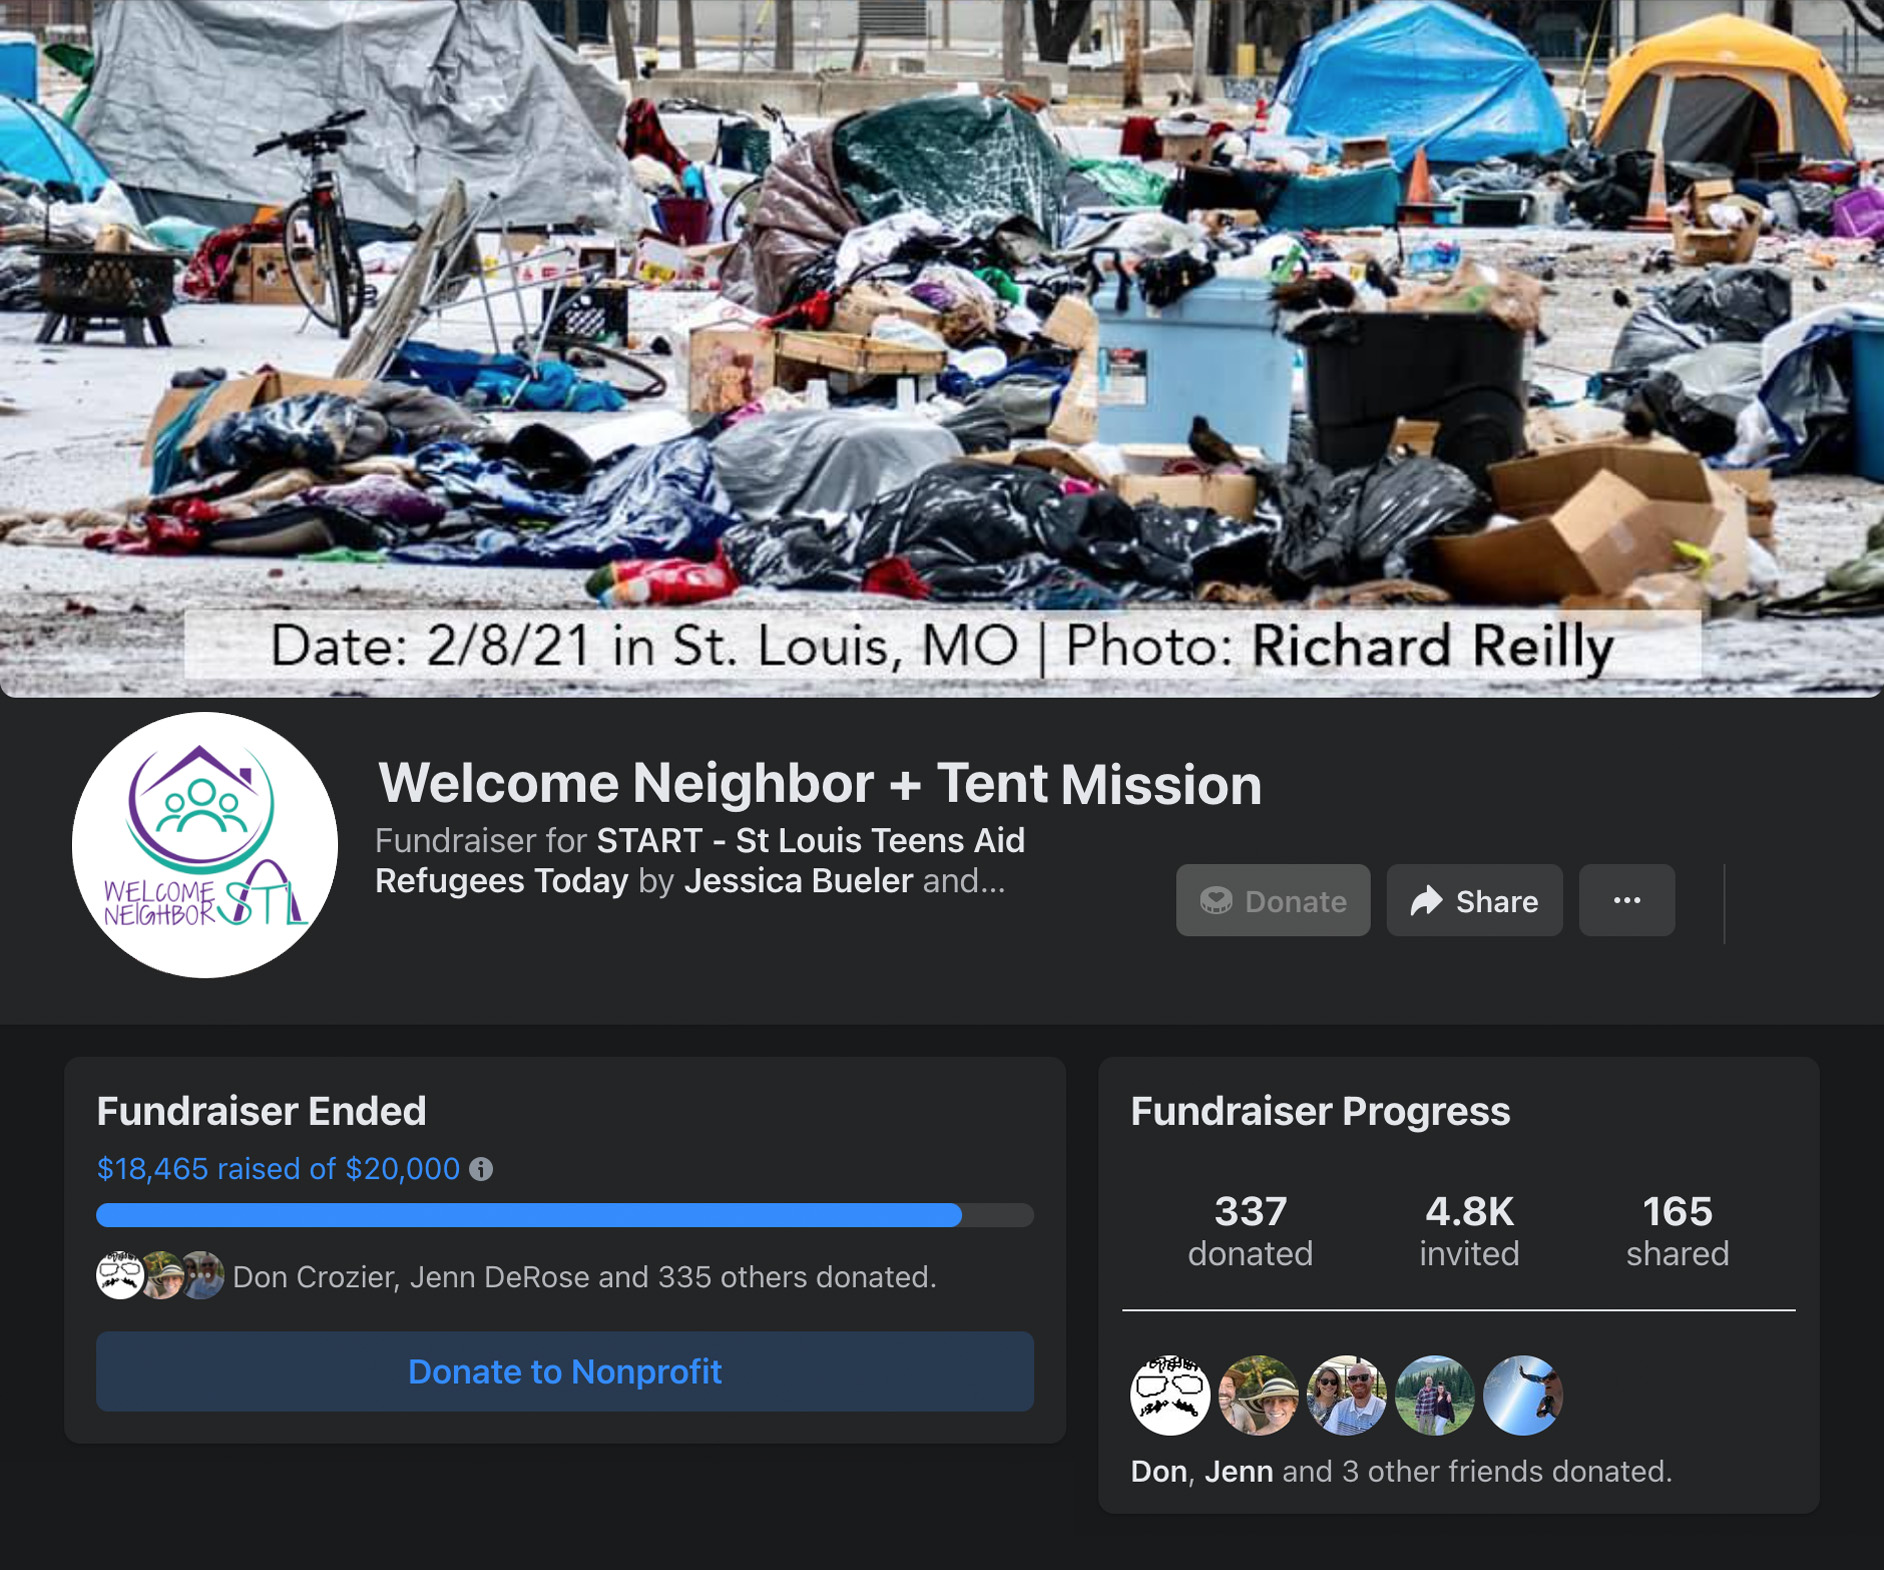 Welcome Neighbor + Tent Mission